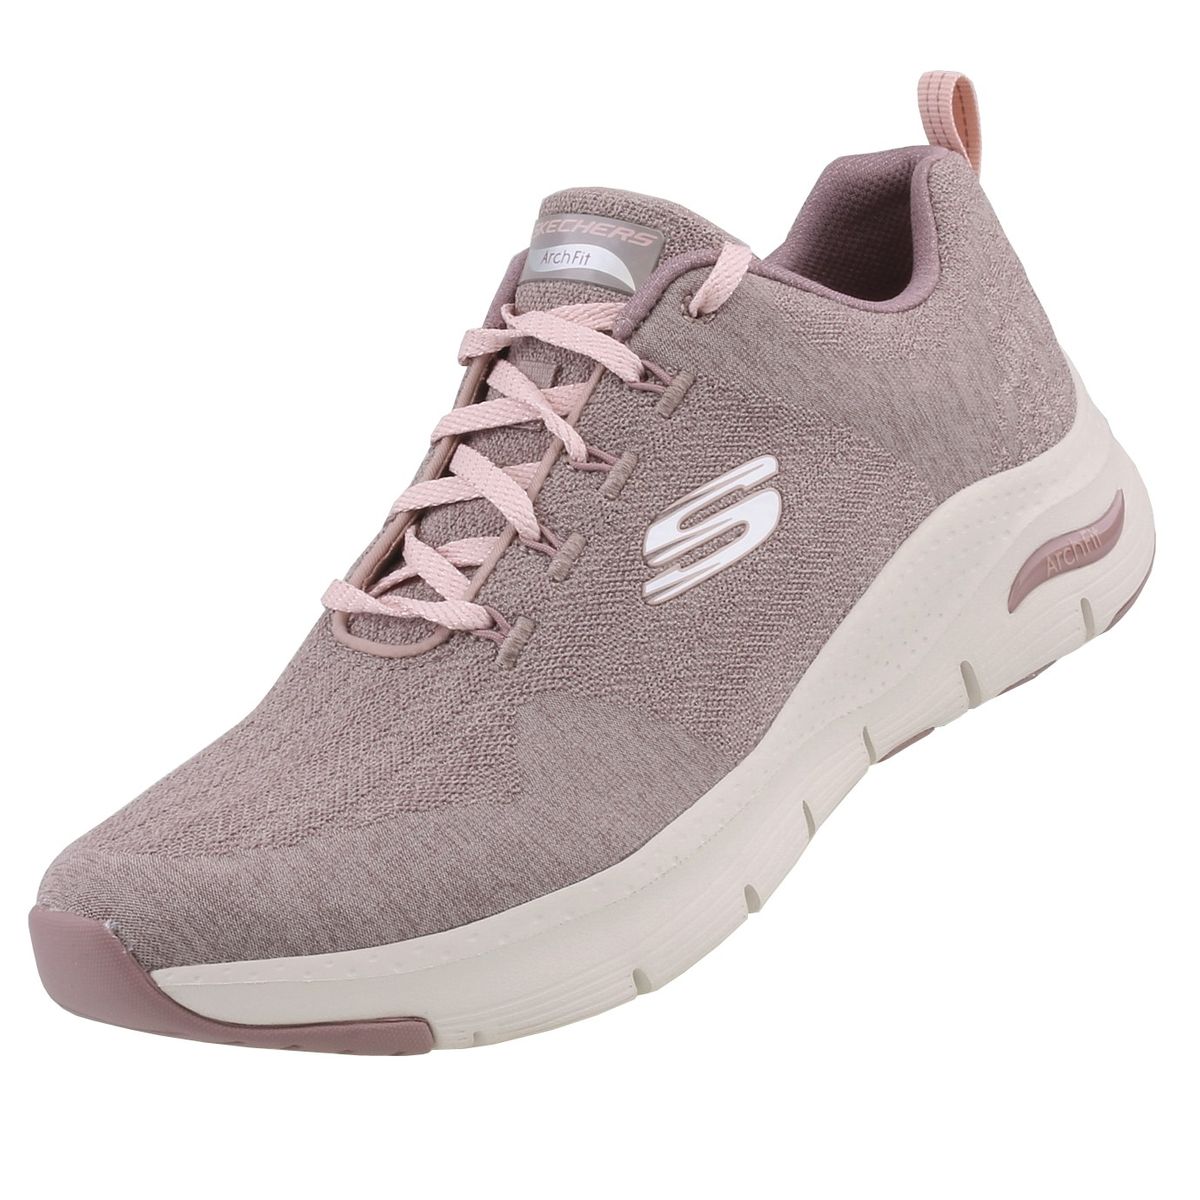 Skechers Arch Fit - Comfy Wave - Dark Taupe